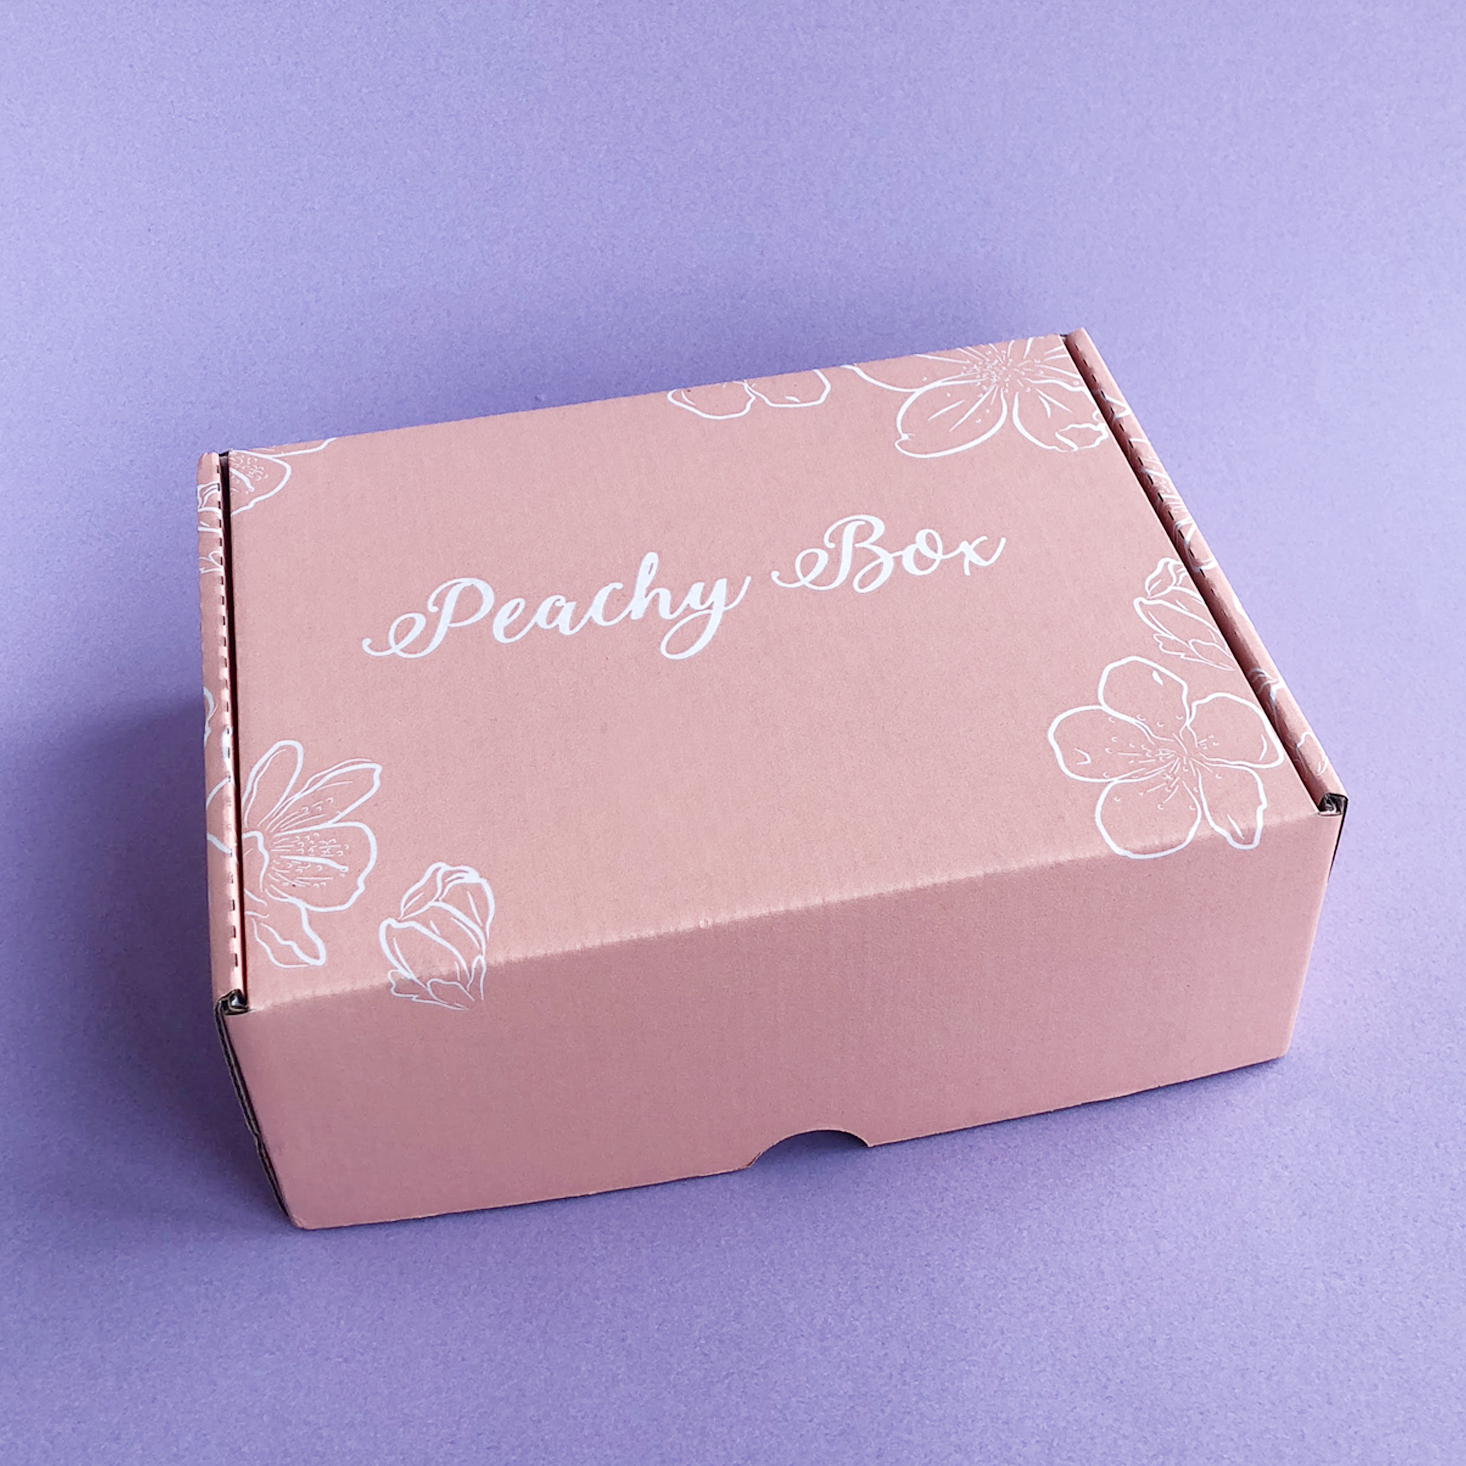 Peachy Box Subscription Review + Coupon – February 2018